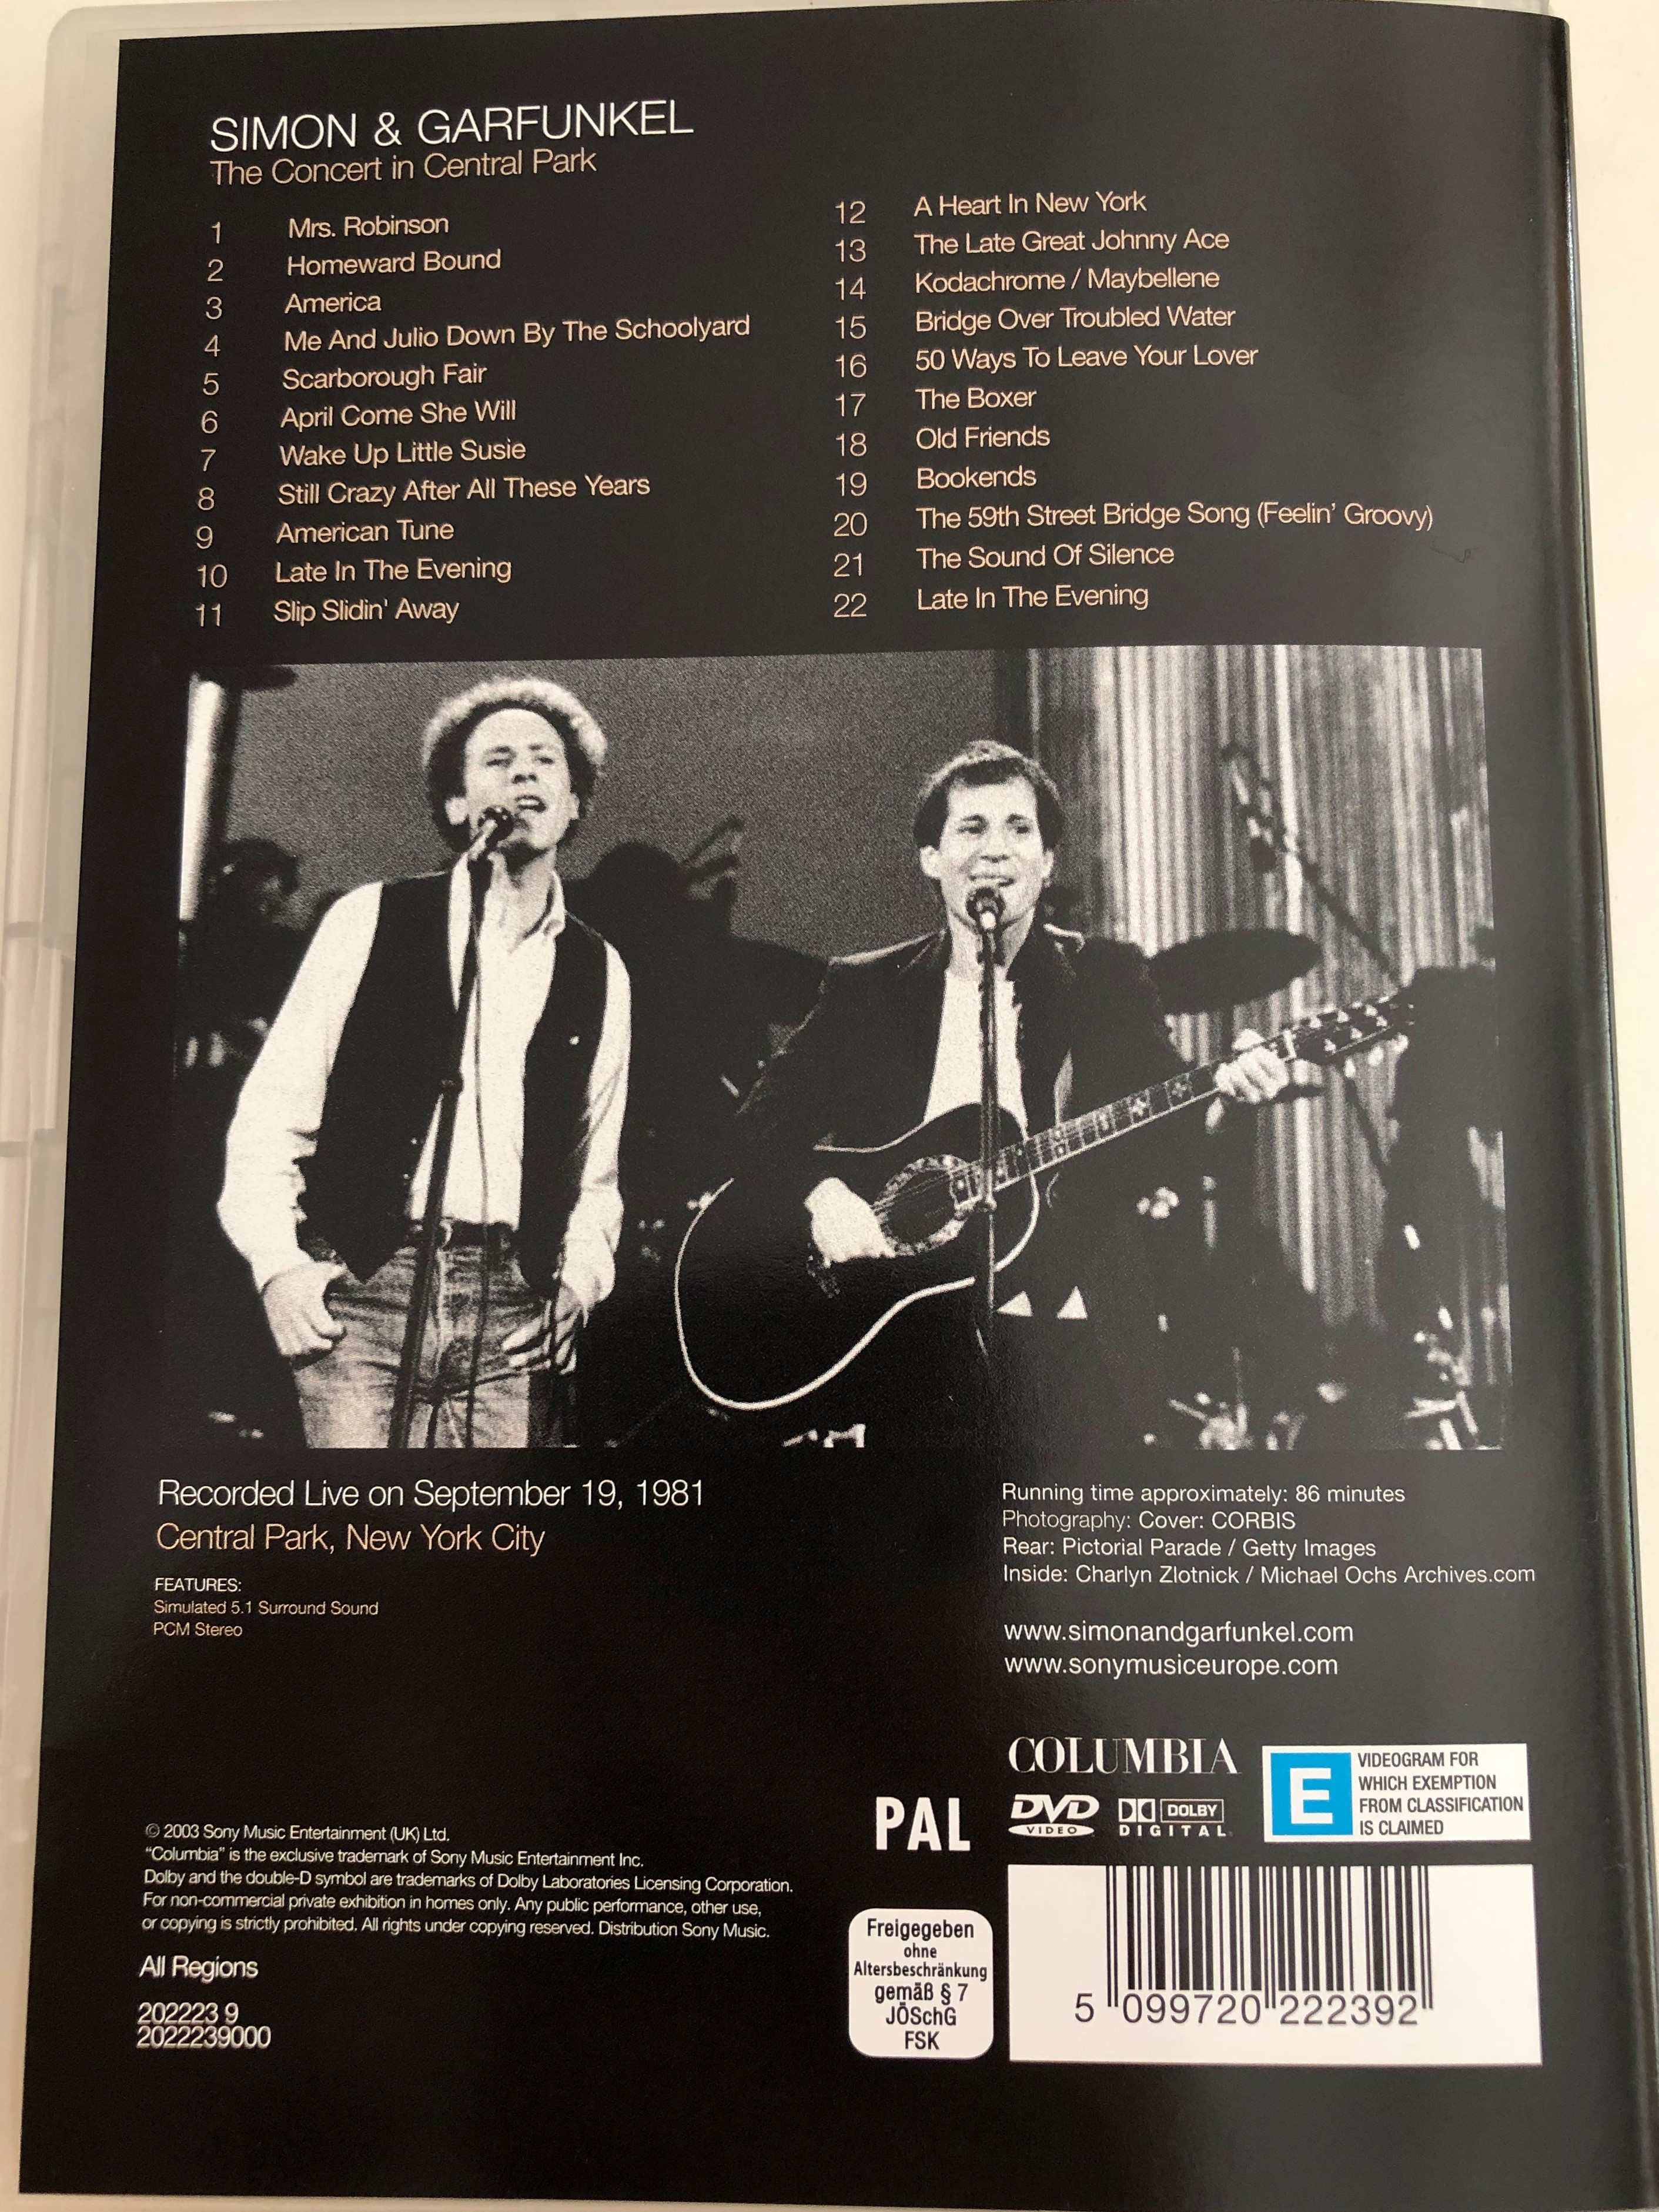 simon-garfunkel-the-concert-in-central-park-dvd-2003-recorded-live-on-september-19-1981-mrs.-robinson-american-tune-late-in-the-evening-columbia-202223-9-3-.jpg